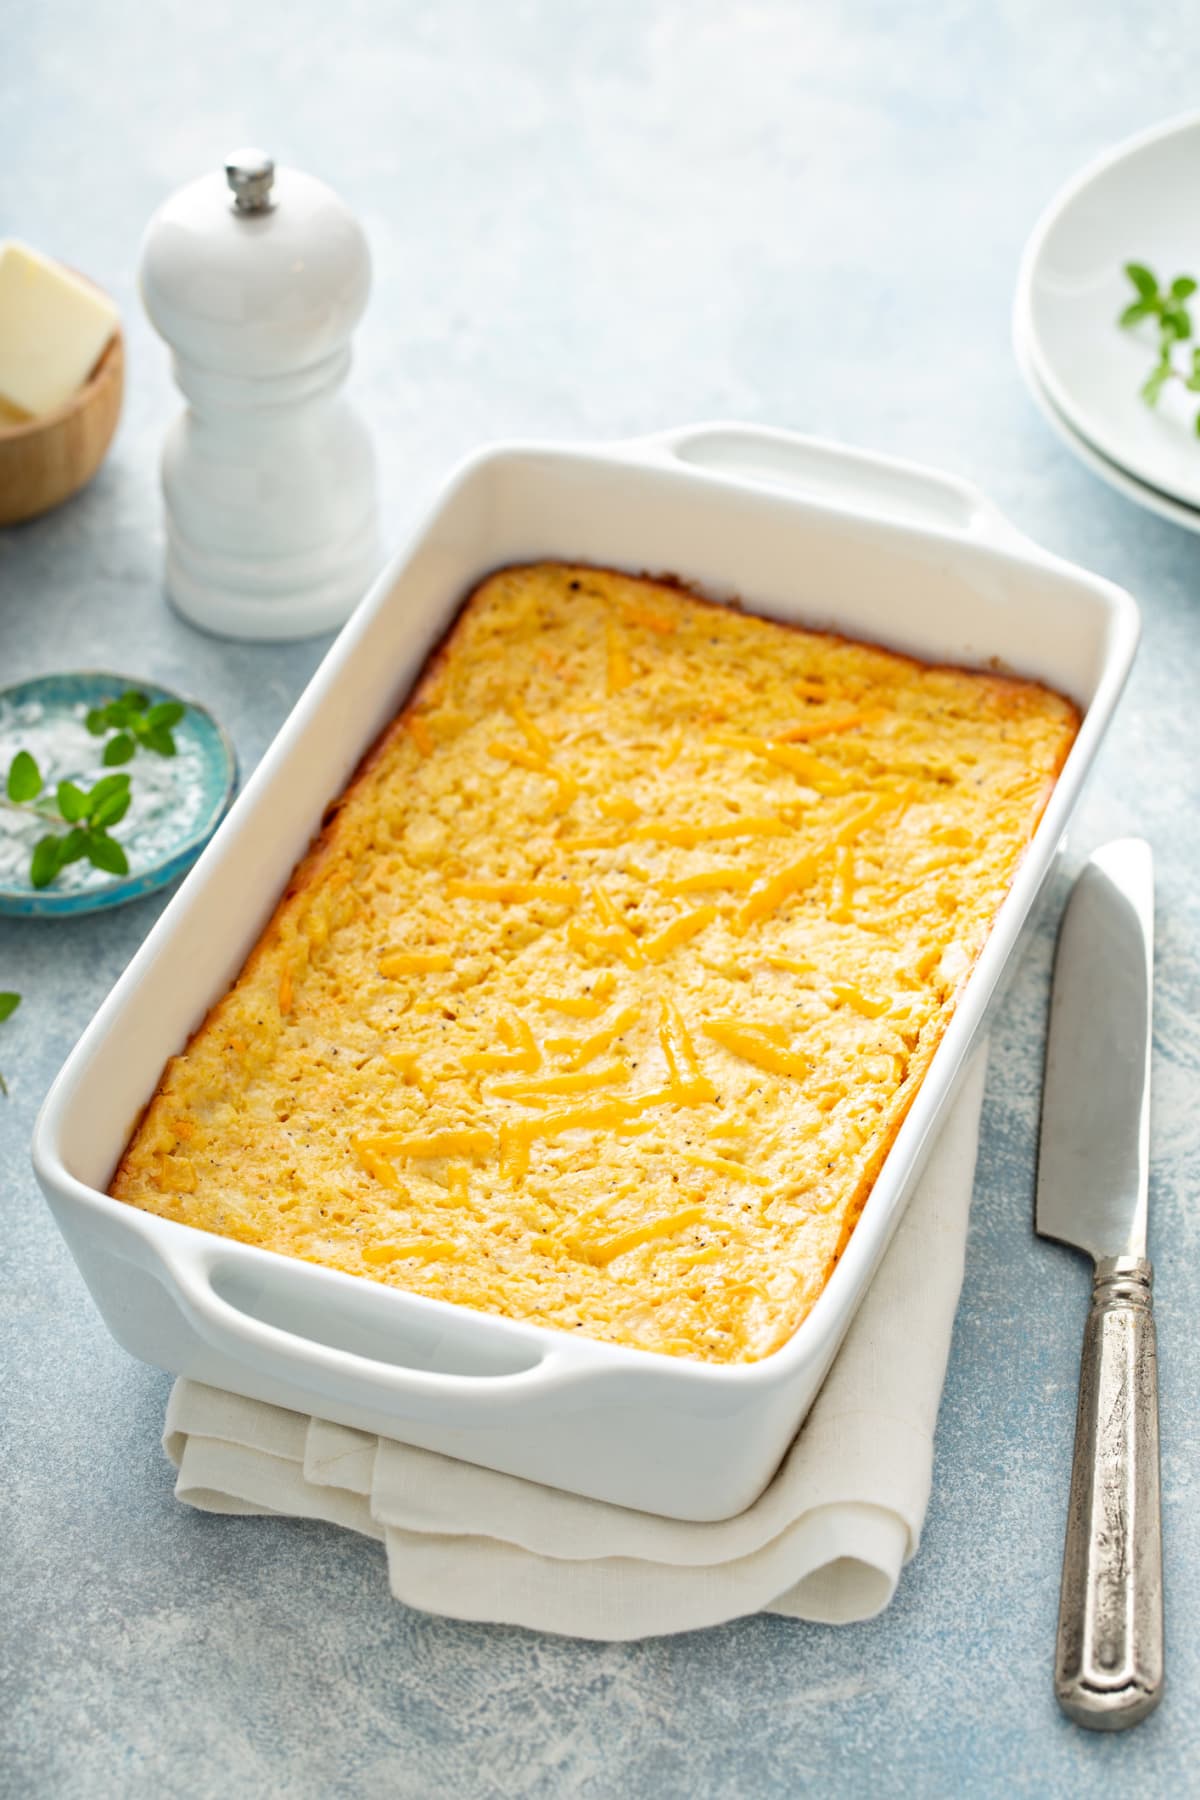 Cheesy cornbread freshly baked in a pan, southern food